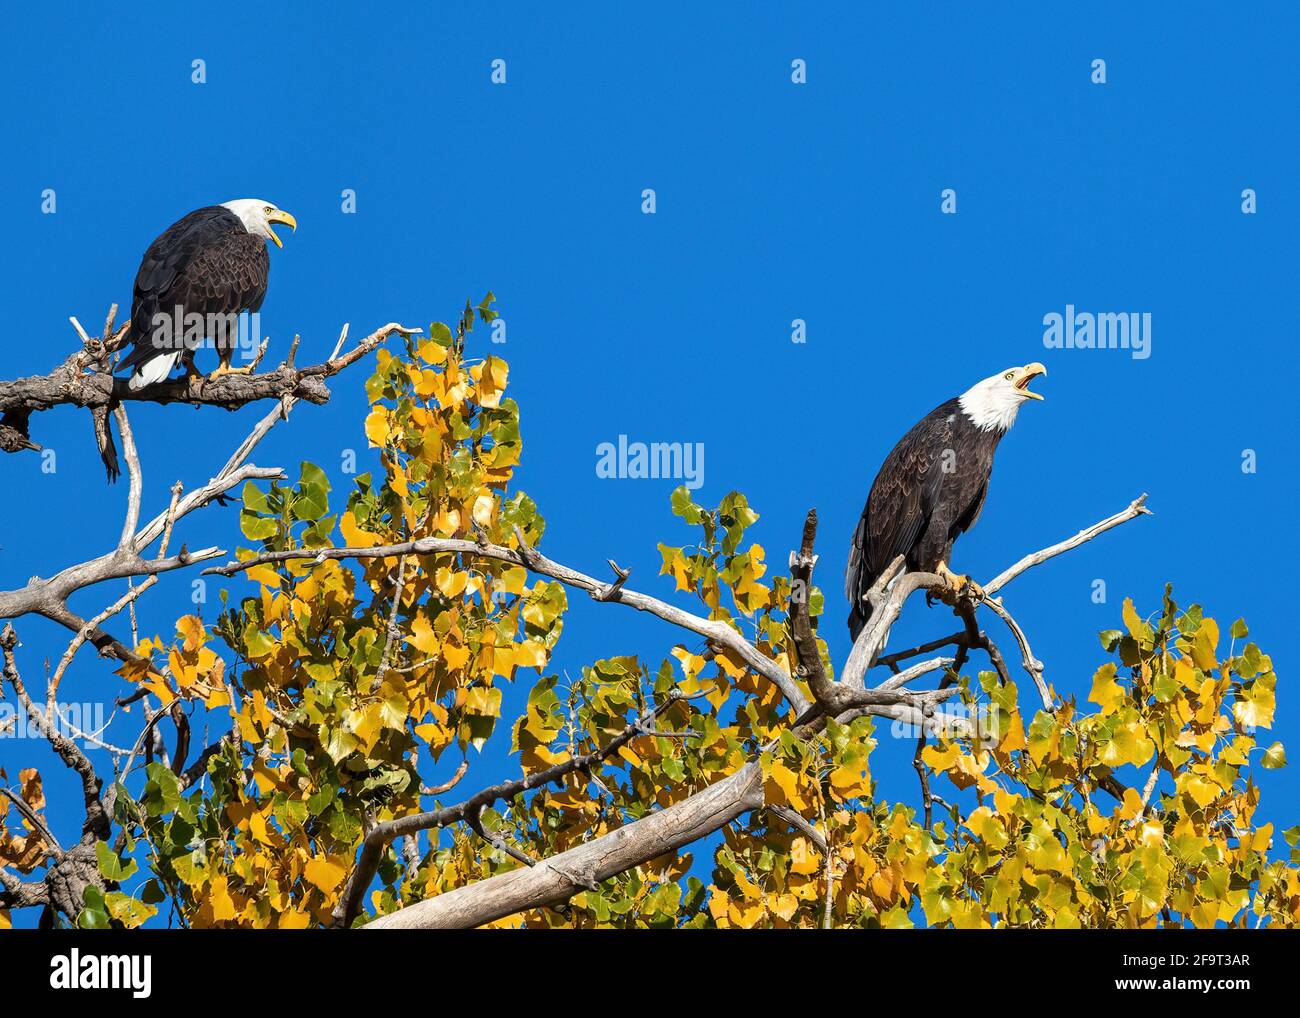 Two mated Bald Eagles atop of a large Cottonwood tree, calling out into the wild, with a deep blue sky and changing foliage in the Fall Season. Stock Photo